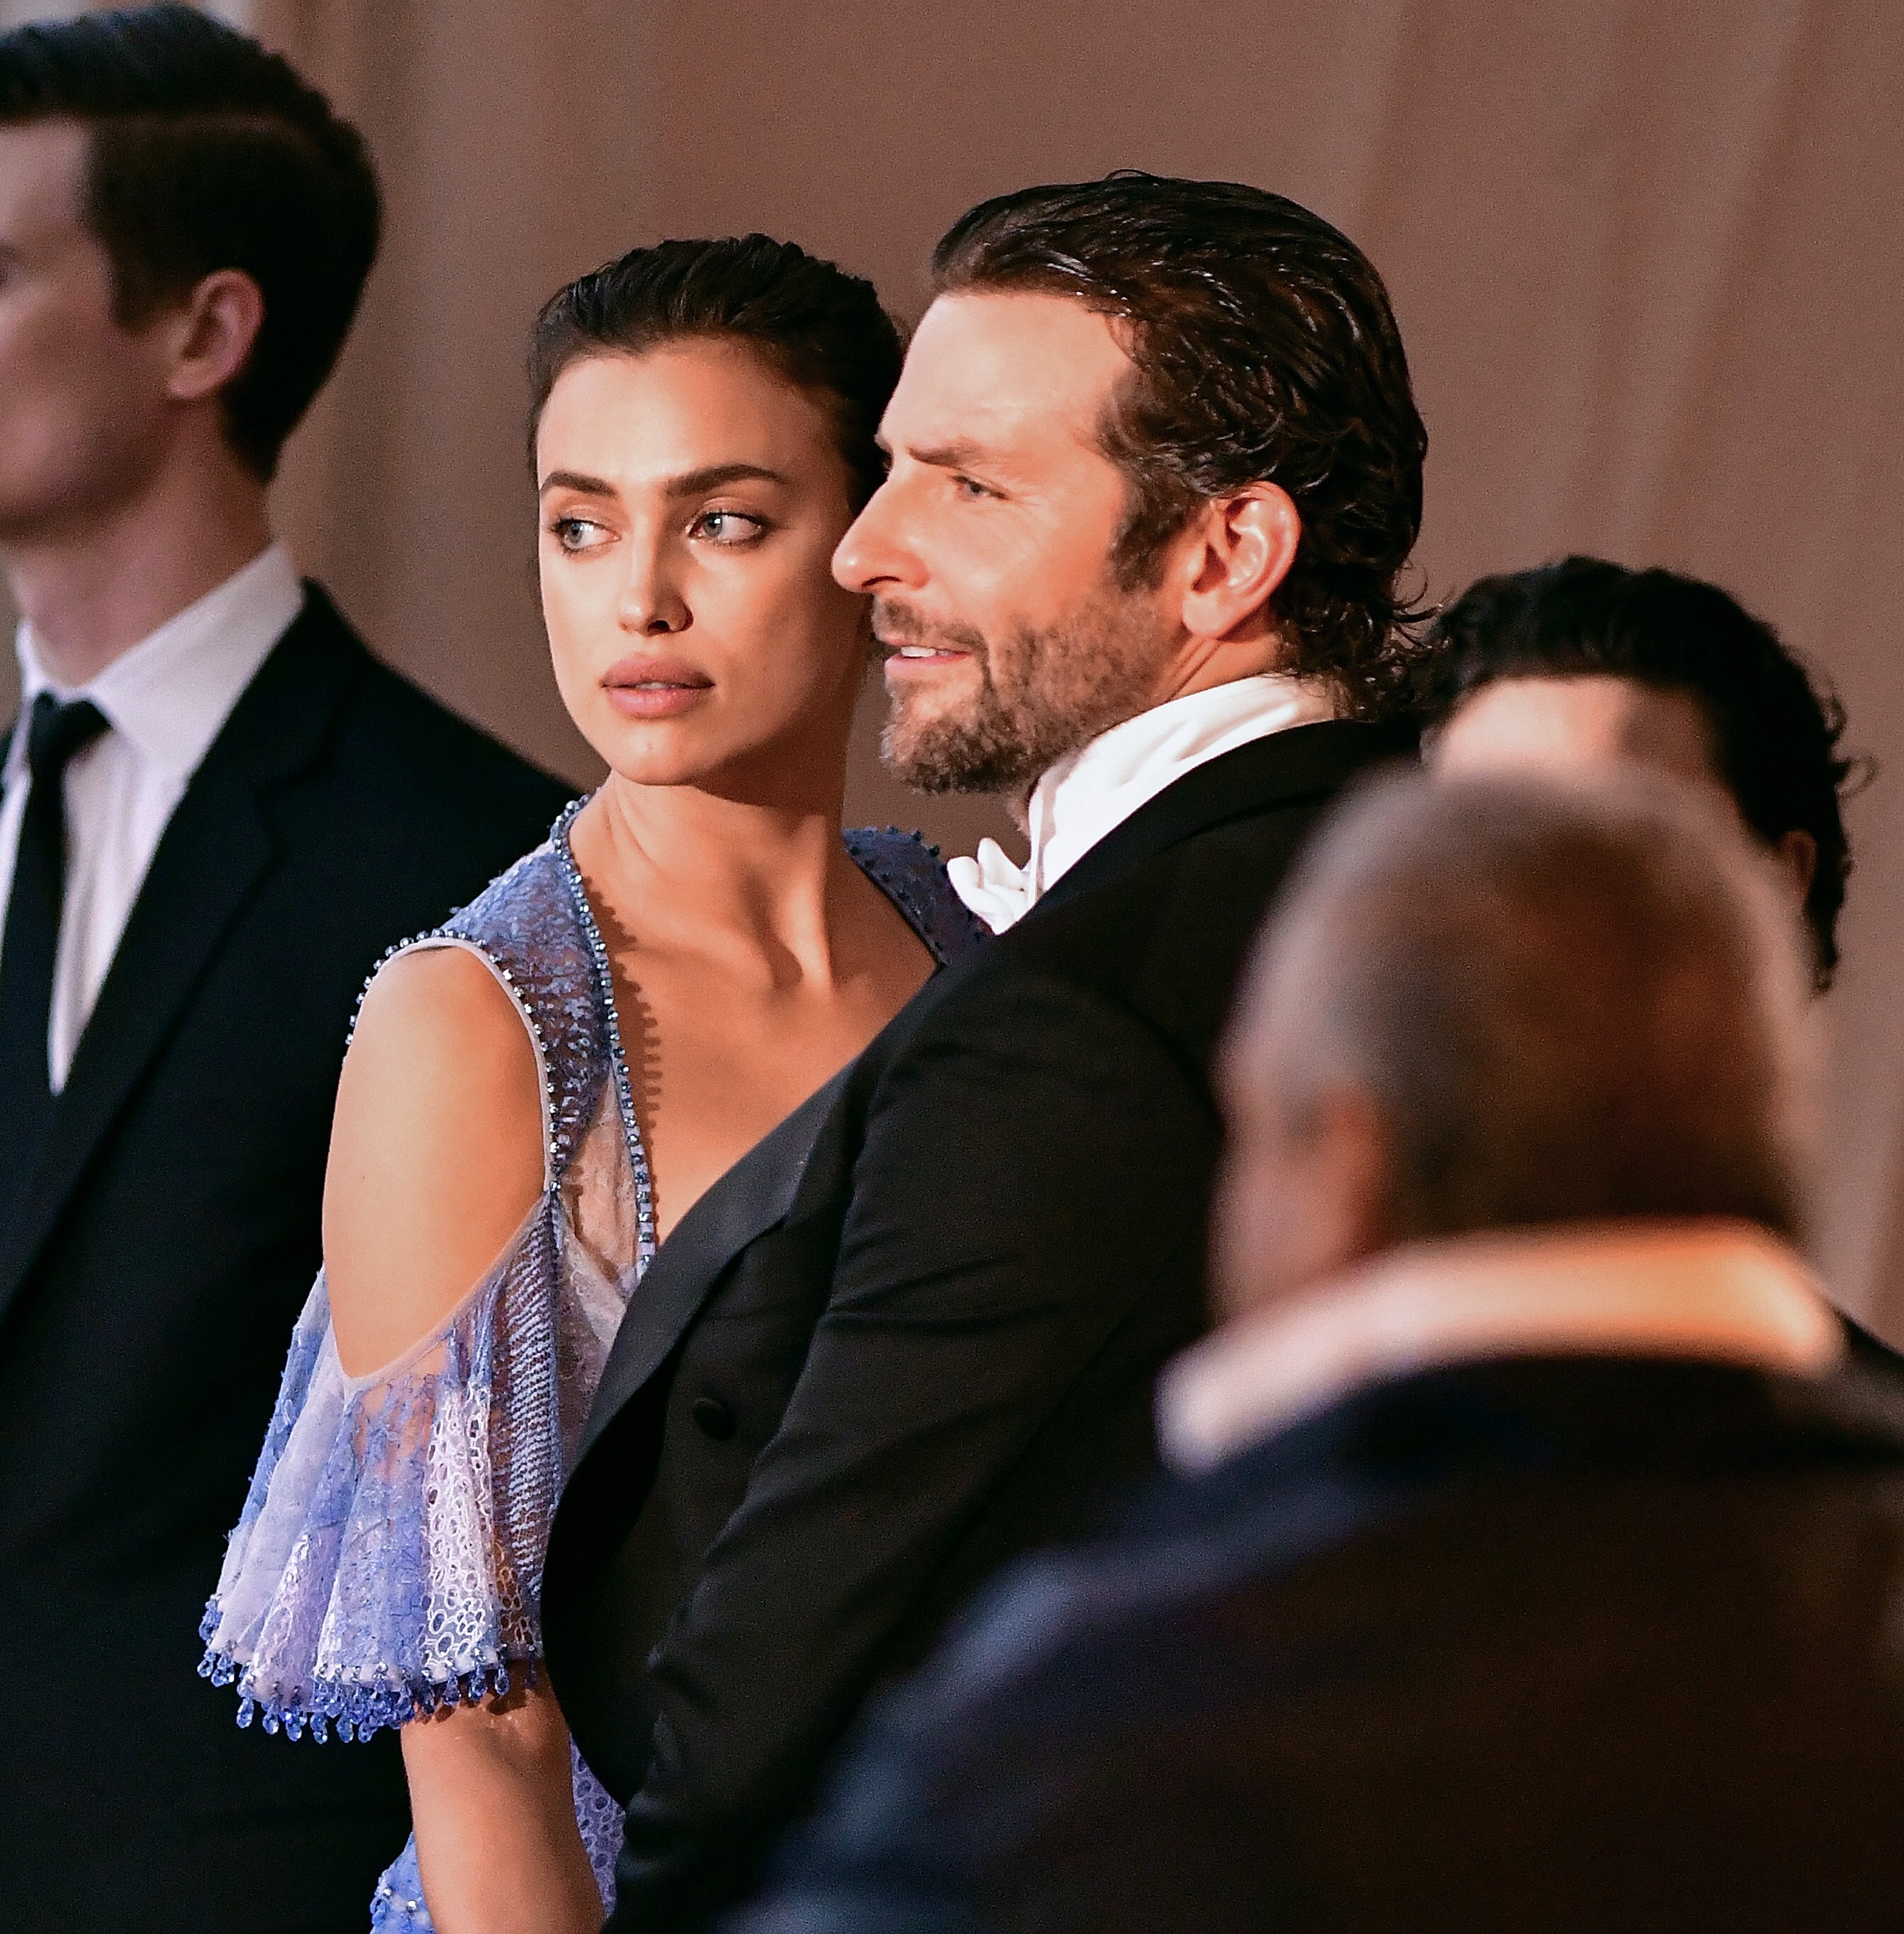 Irina Shayk and Bradley Cooper attend 'Manus x Machina: Fashion in an Age of Technology' Costume Institute Gala at Metropolitan Museum of Art on May 2, 2016 in New York City | Photo : Images